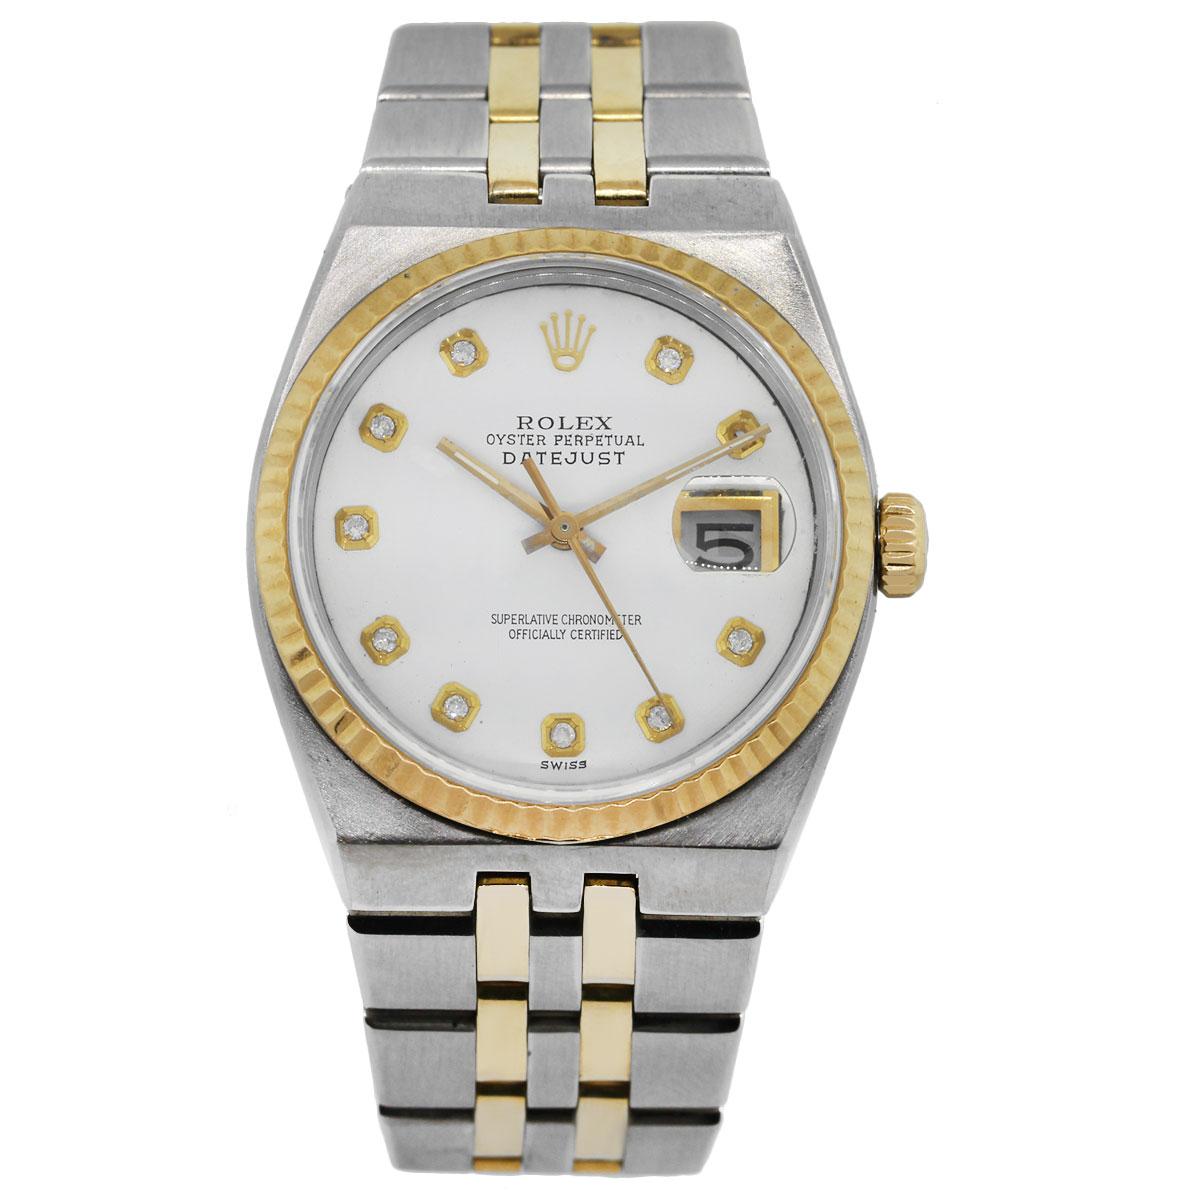 Brand: Rolex
Model: Oysterquartz
MPN: 17000B
Case Material: Stainless Steel
Case Diameter 	
Crystal: Scratch resistant sapphire crystal
Bezel: 18k yellow gold fluted bezel
Dial: White pyramid dial with diamond hour markers and yellow gold minute and